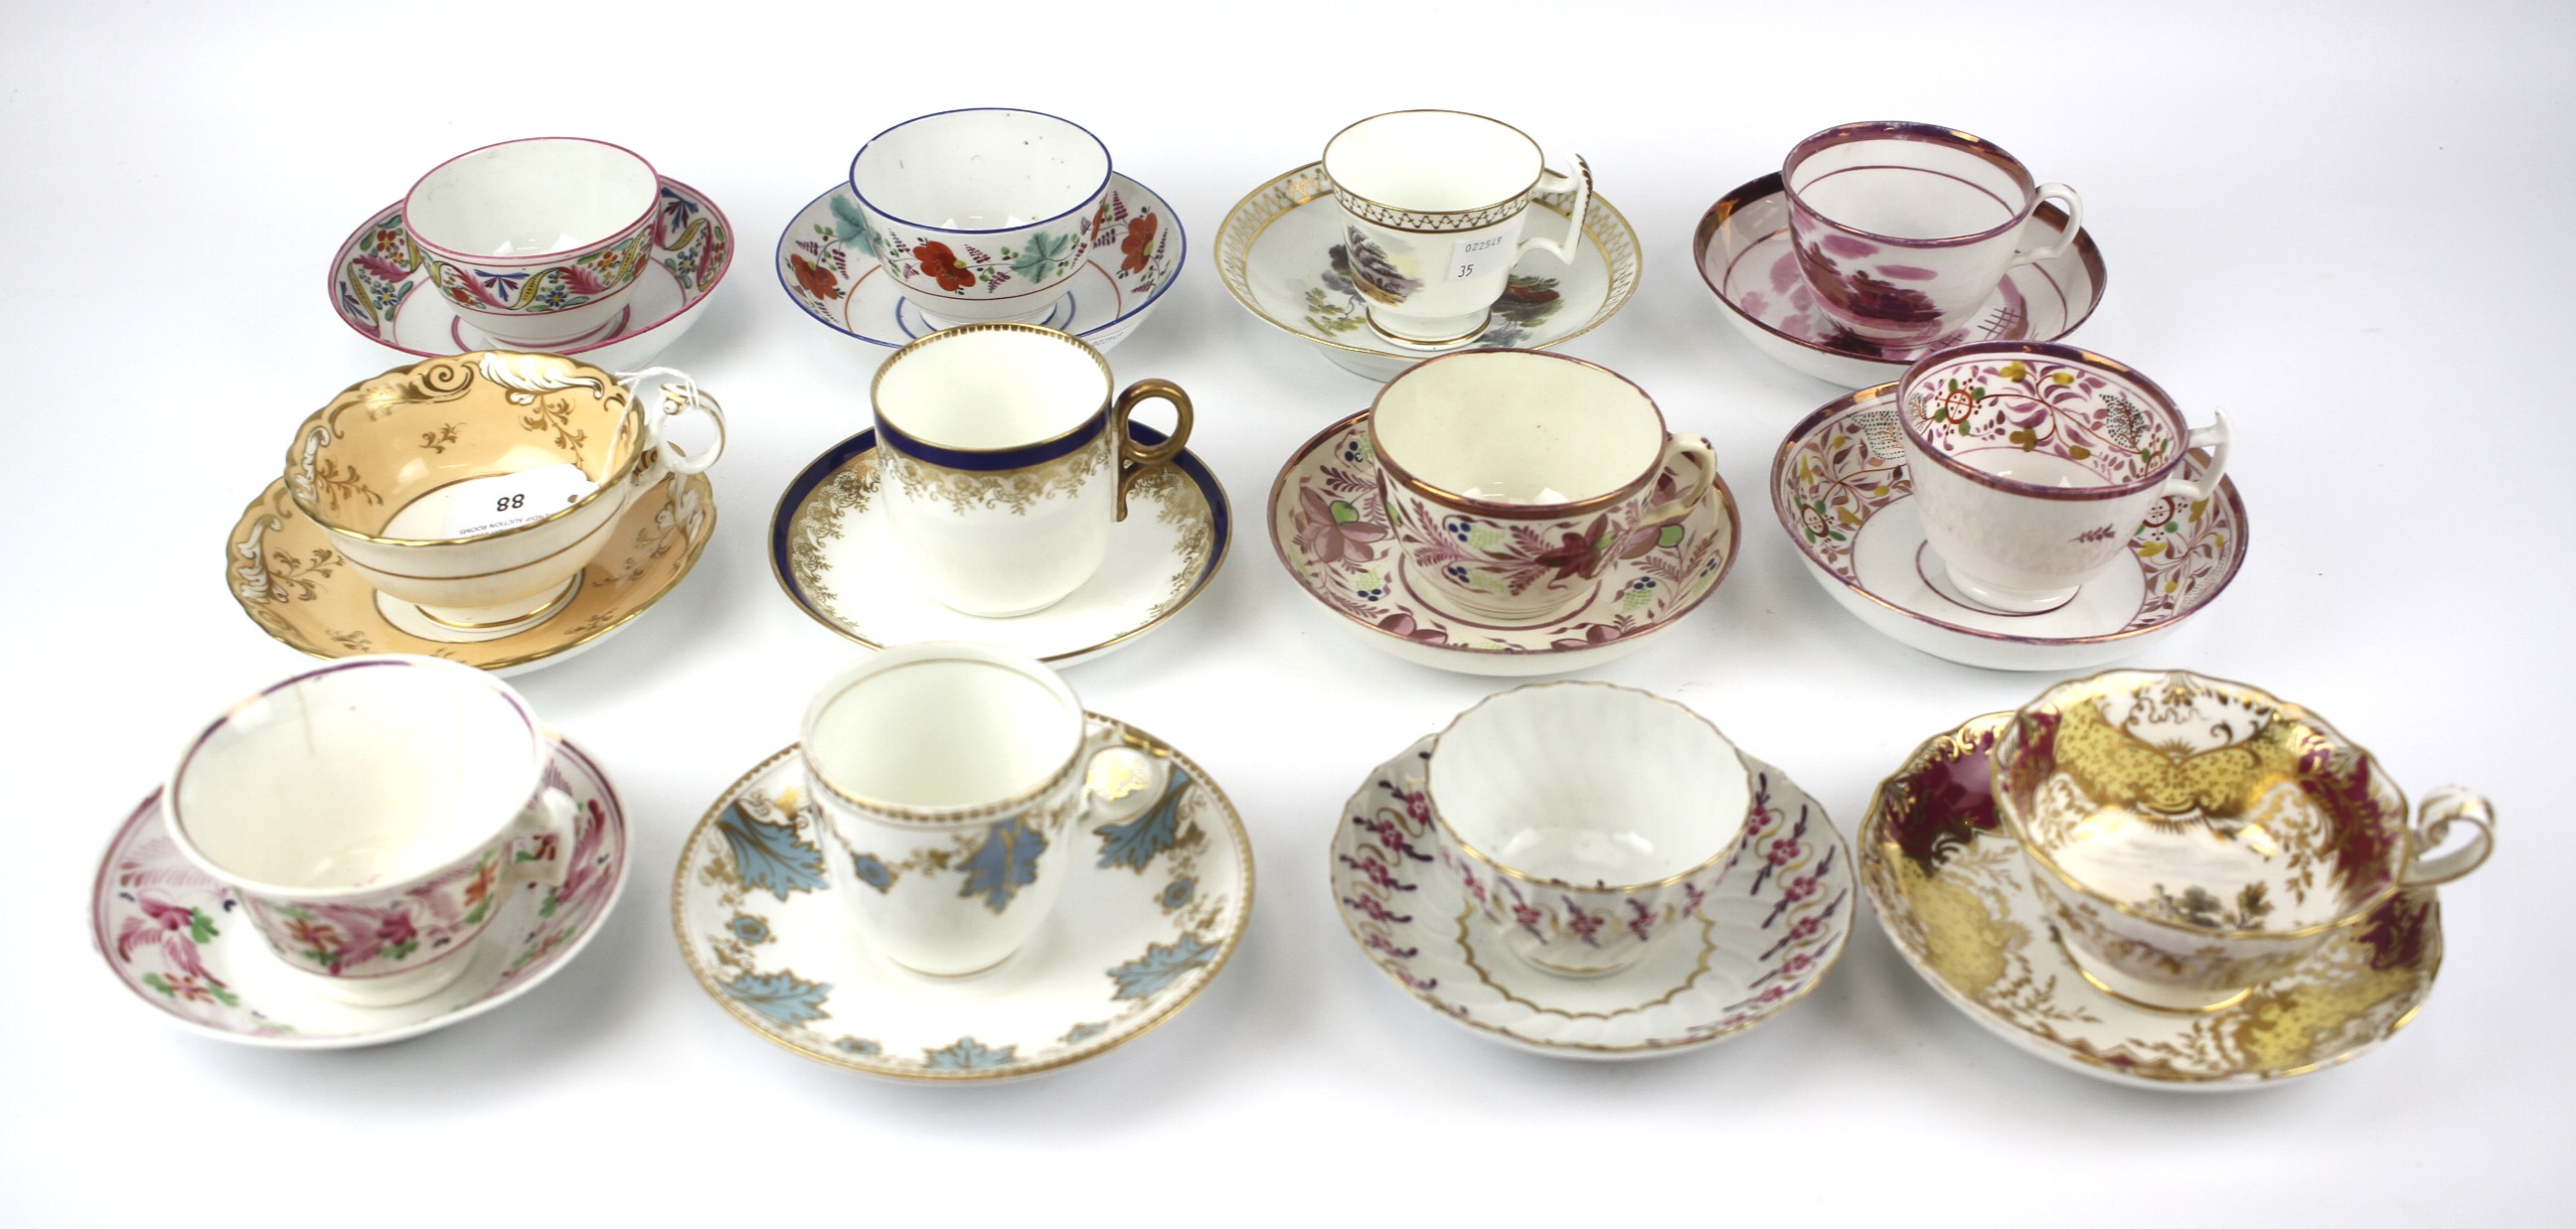 A group of late 18th - early 19th century English porcelain tea wares.